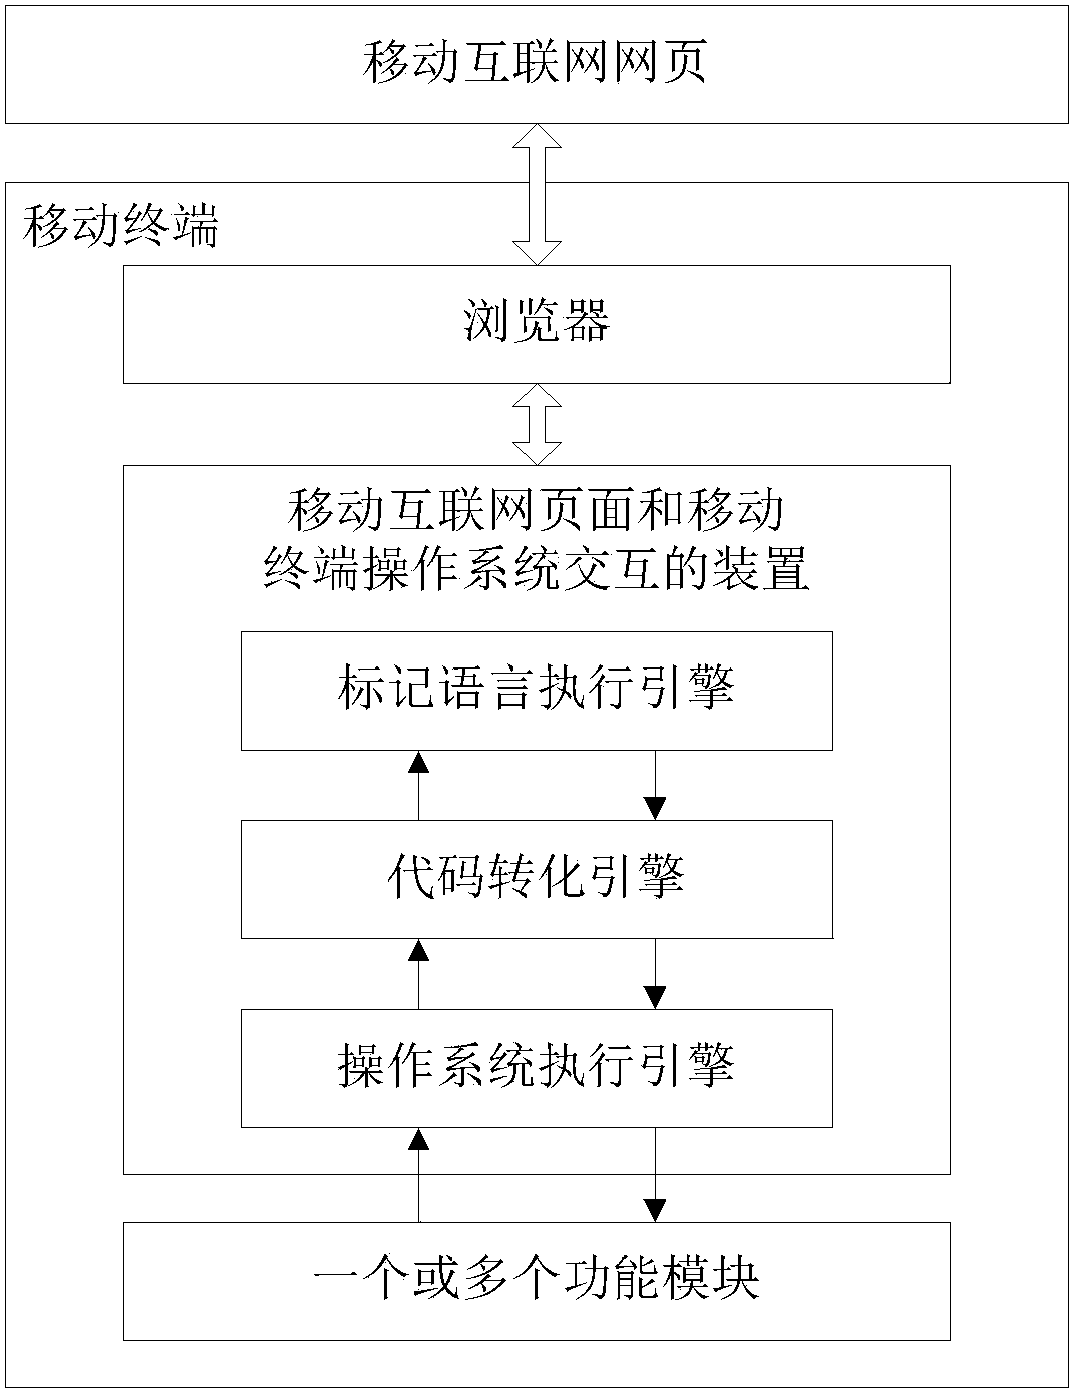 Method and device for interaction of mobile internet webpage and mobile terminal capacity